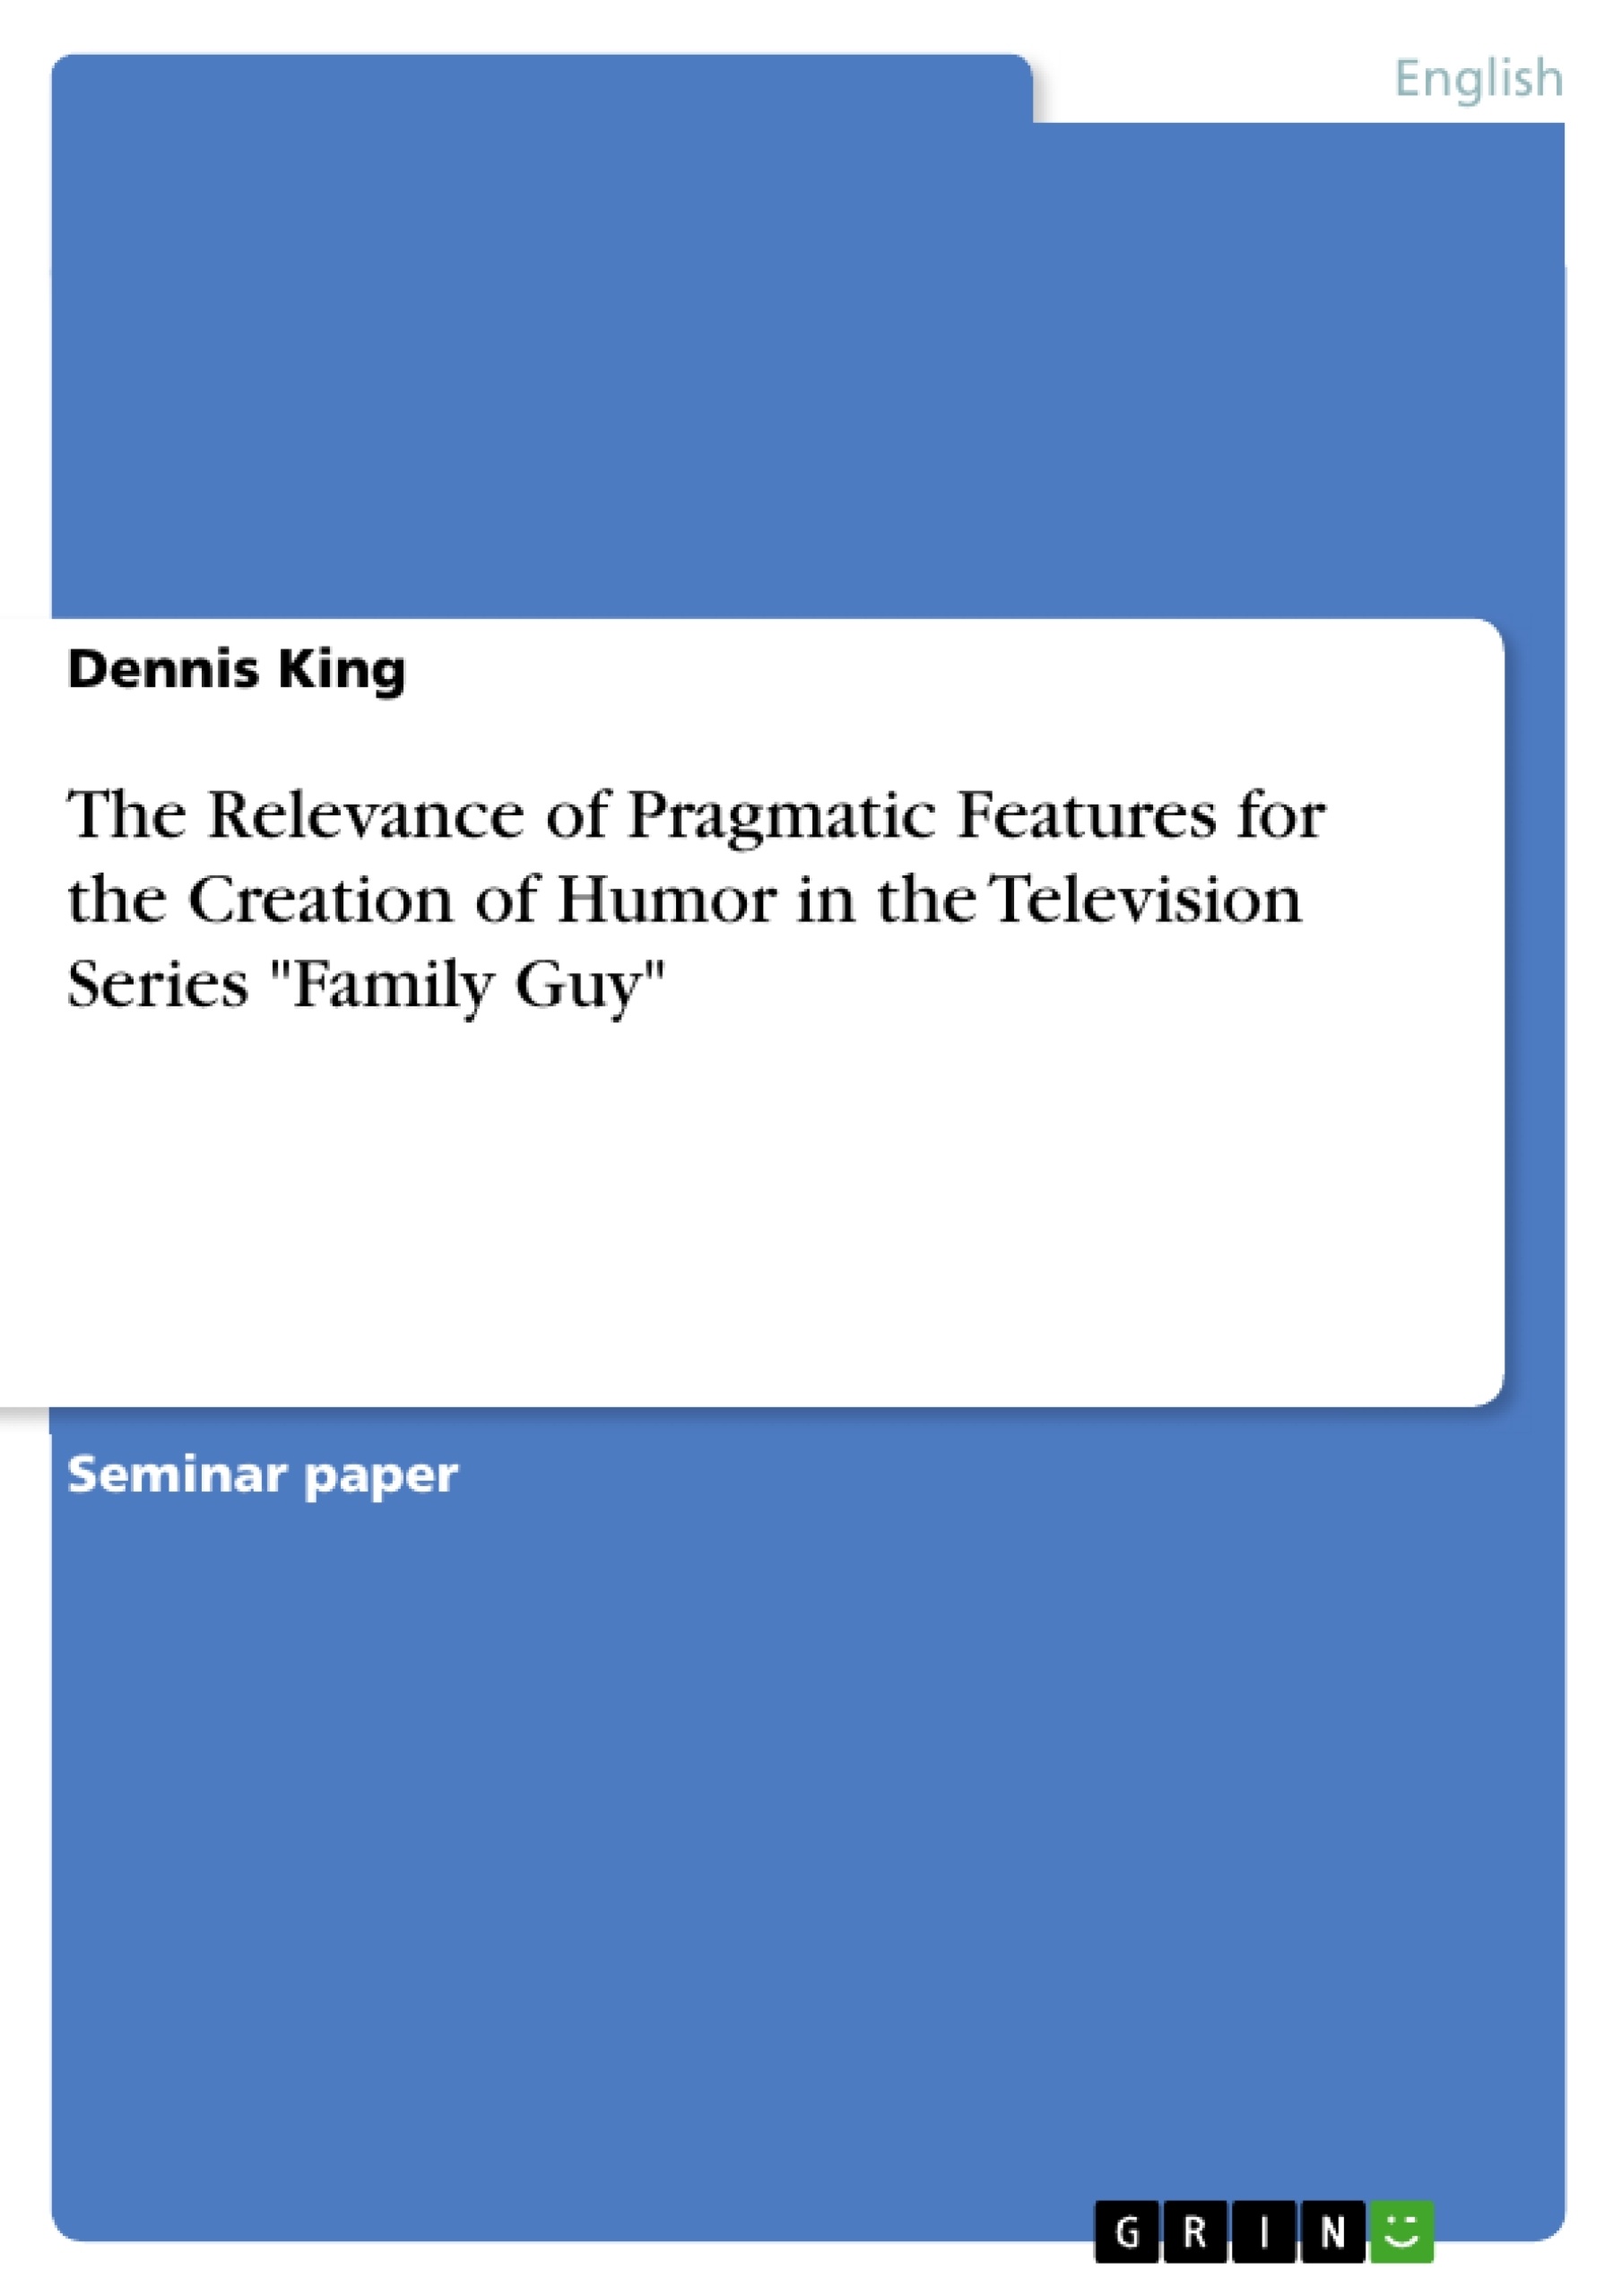 Title: The Relevance of Pragmatic Features for the Creation of Humor in the Television Series "Family Guy"